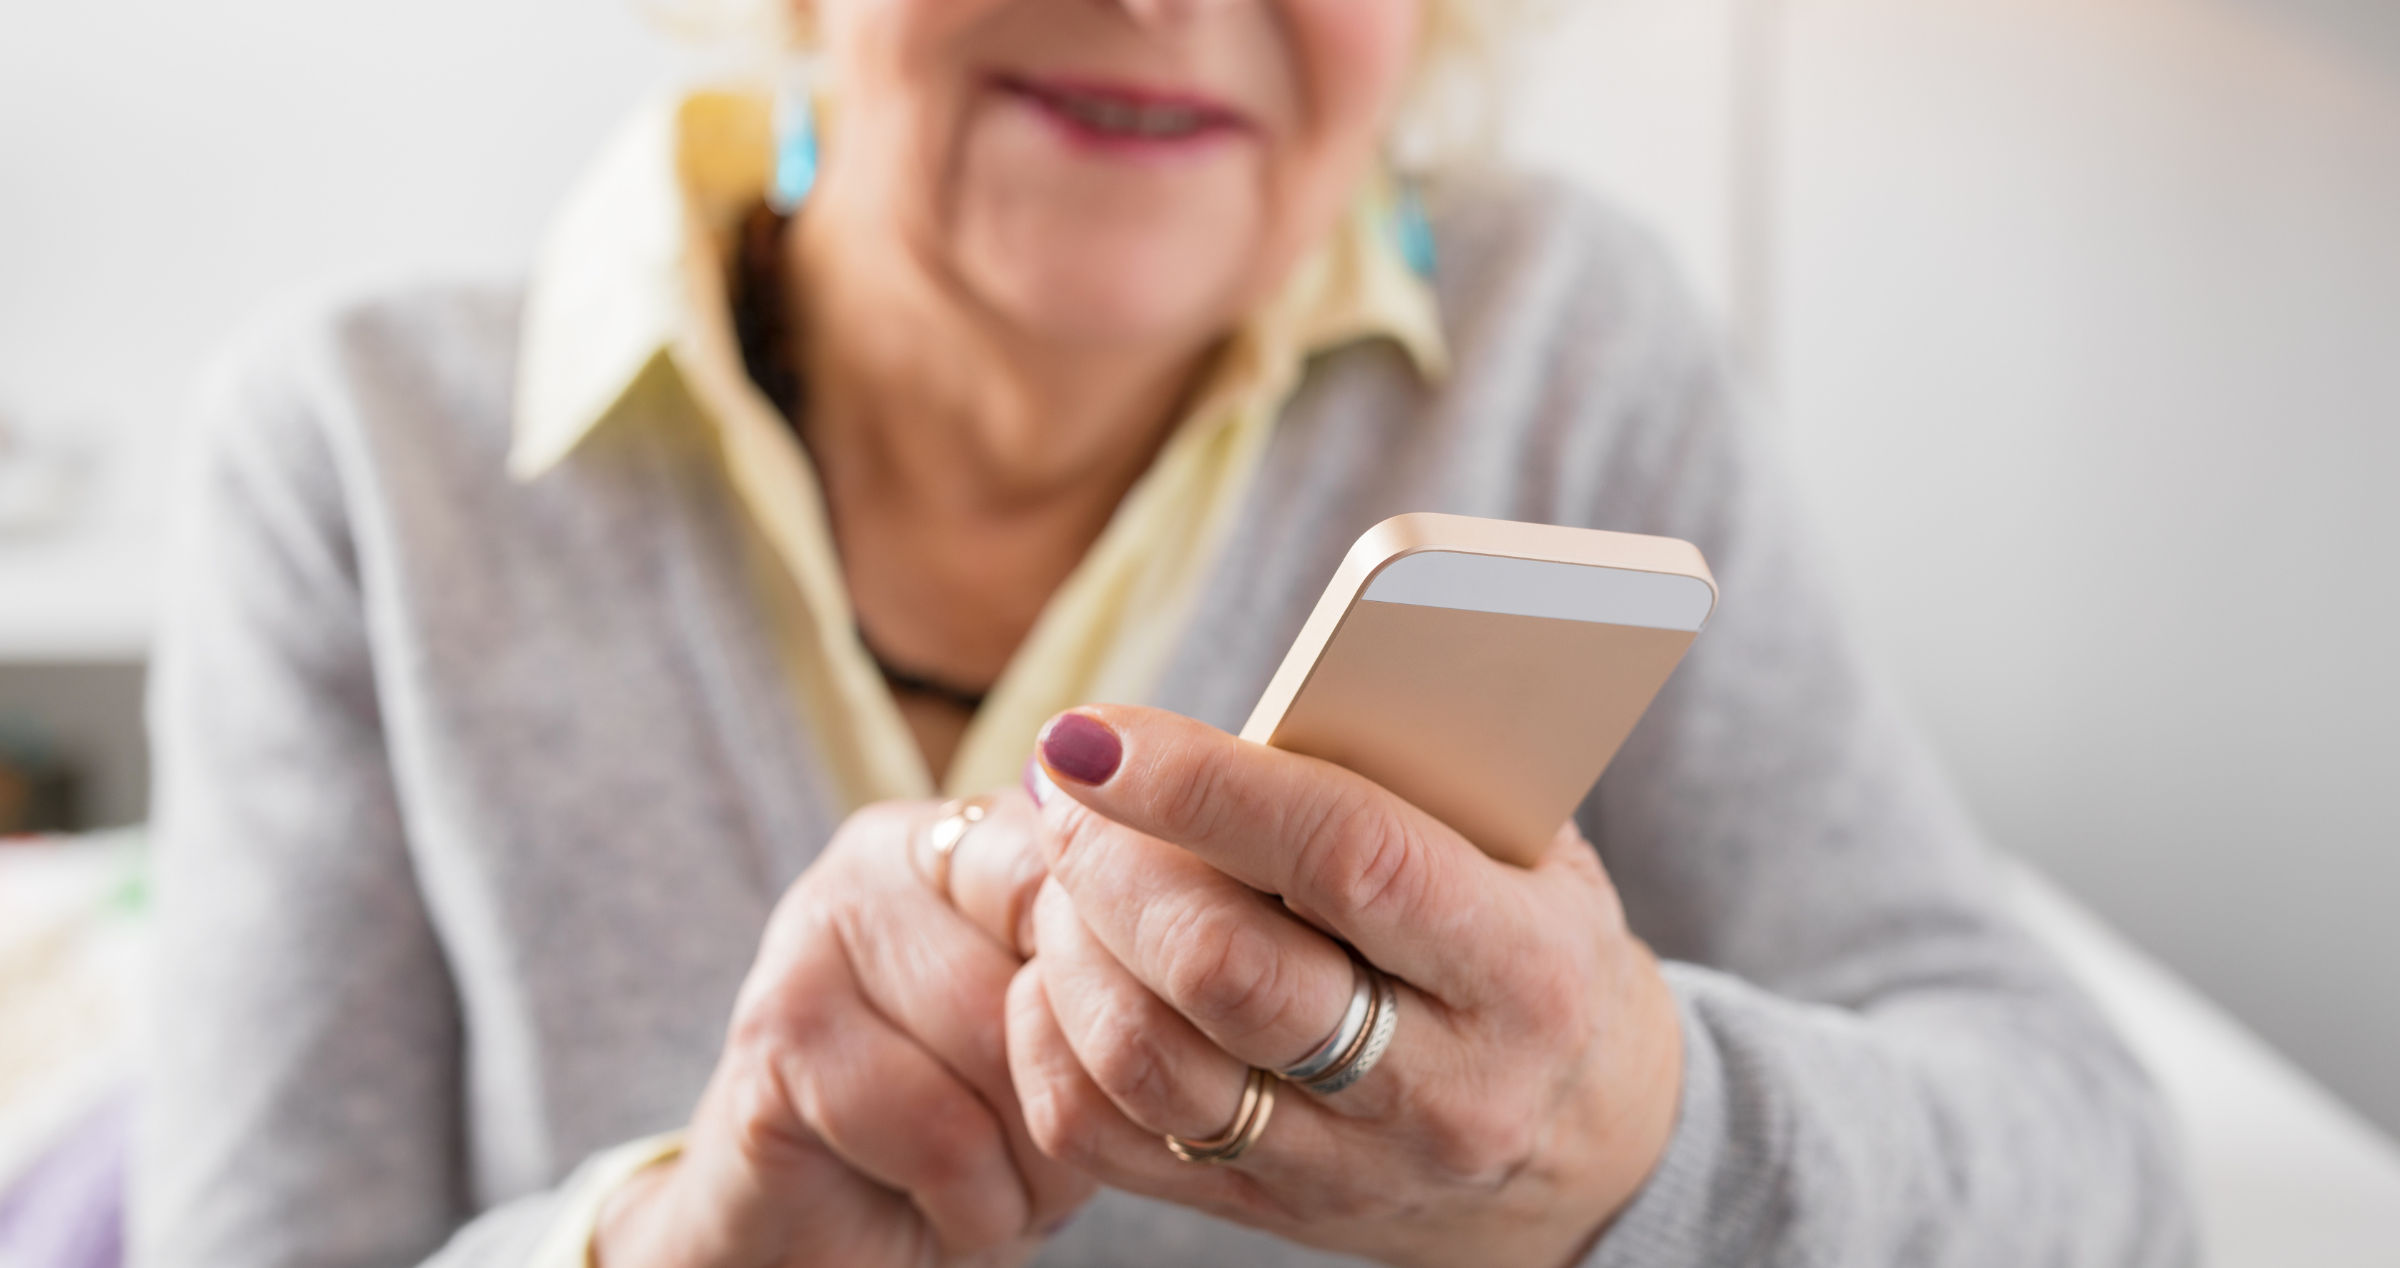 A close up of a woman's hands holding and using a mobile phone.